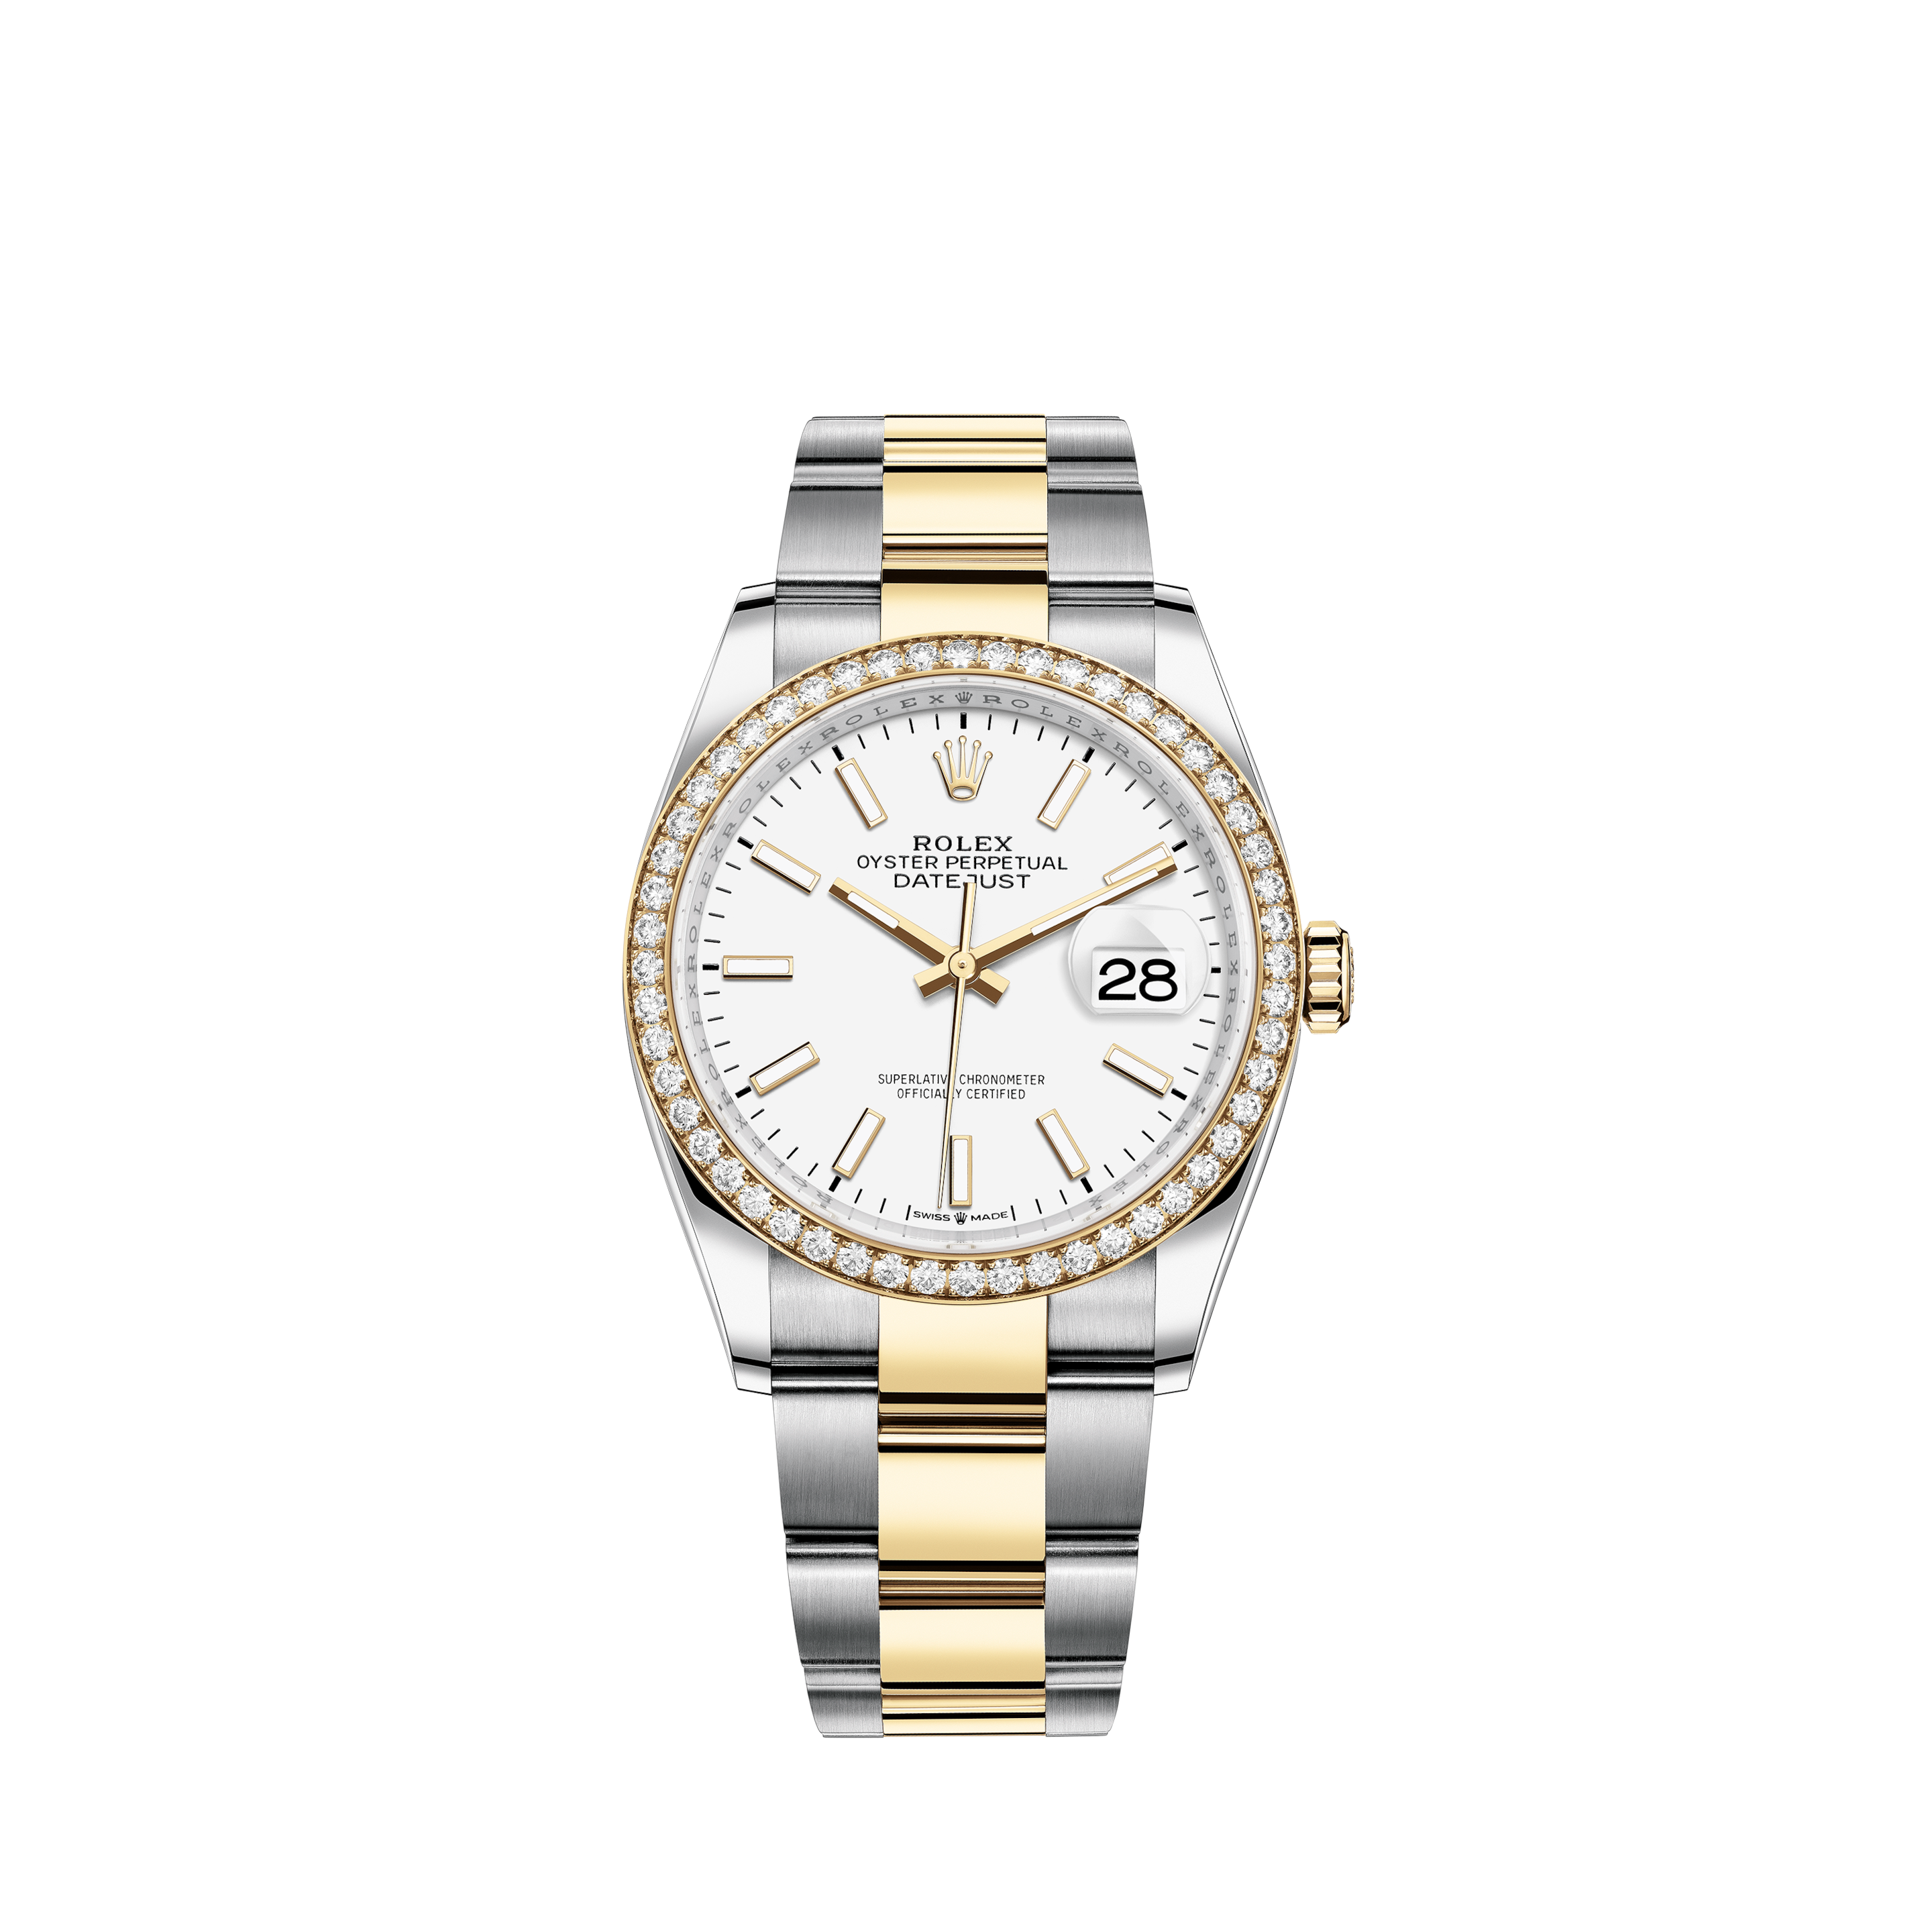 Rolex Women's Rolex 31mm Datejust Two Tone Jubilee Champagne Color String Diamond Accent Dial Bezel + Lugs + Sapphire 68273Rolex Women's Rolex 31mm Datejust Two Tone Jubilee Champagne Gold Jubilee Metal Plate Dial Bezel + Lugs + Emerald